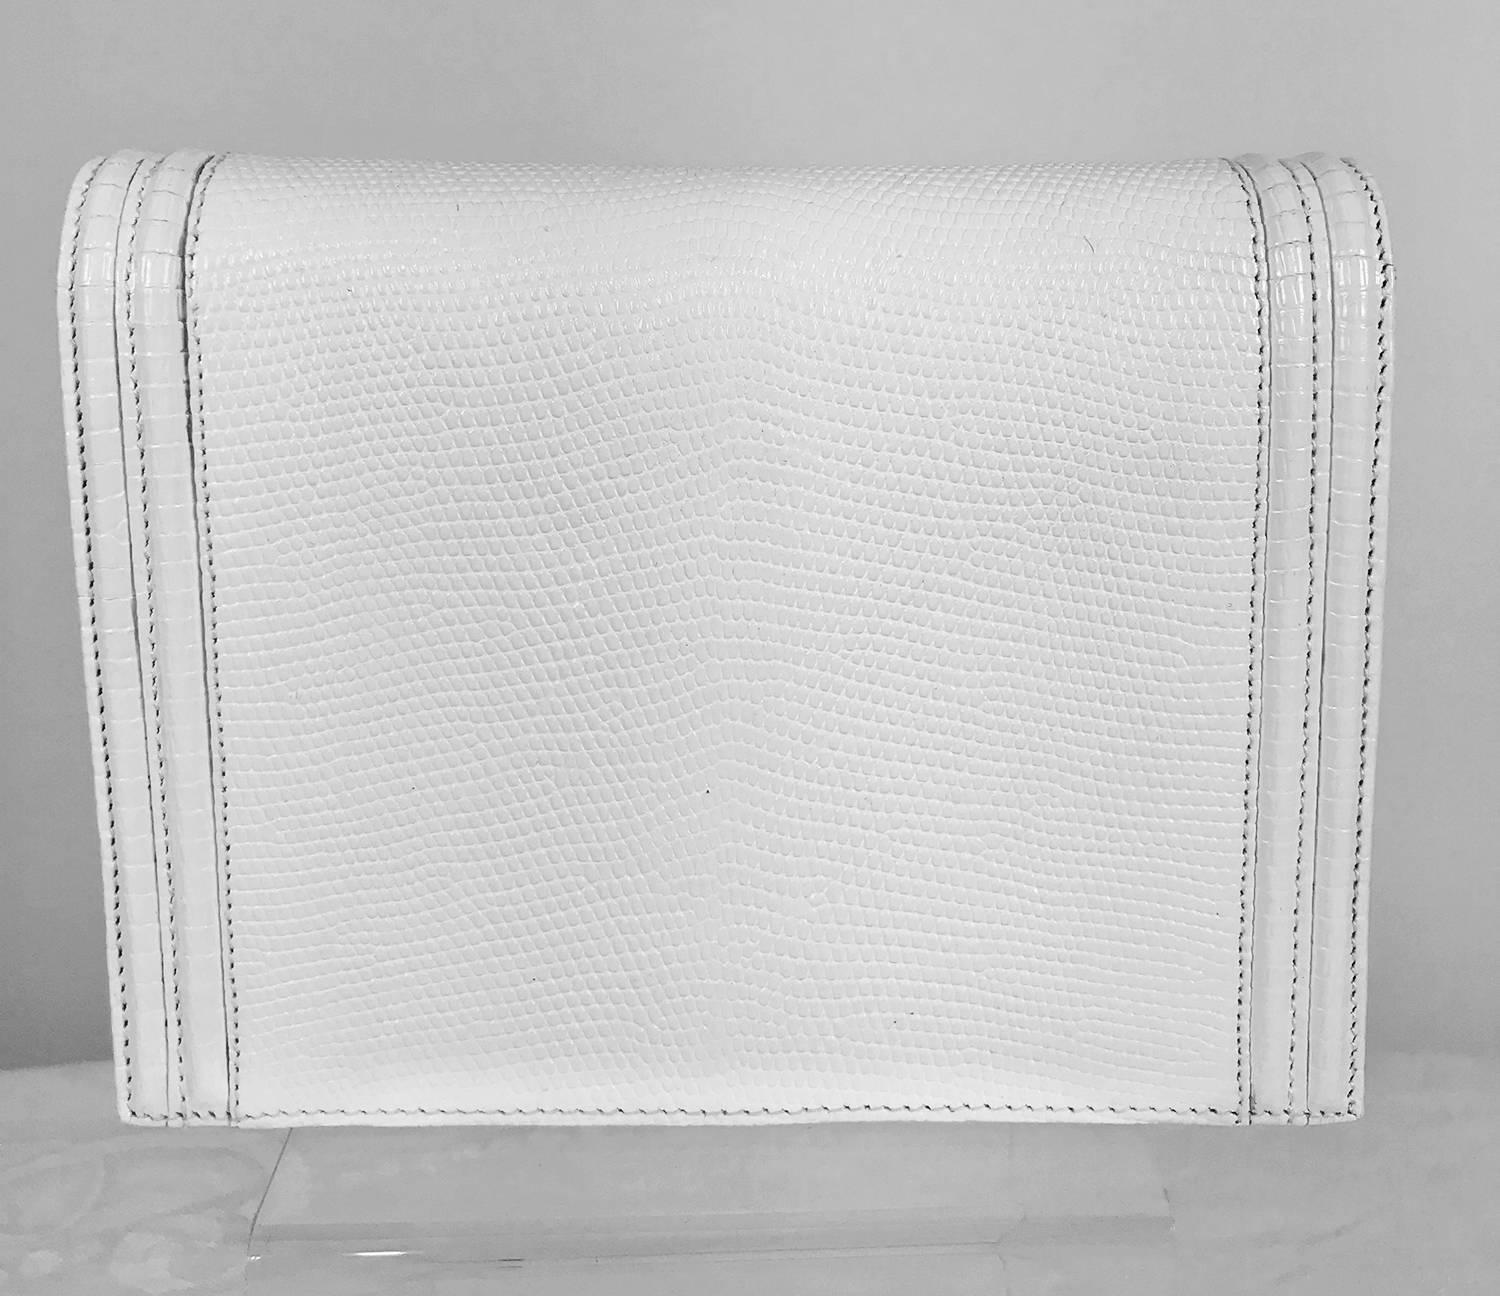 Lana of London white envelope style lizard clutch with gold hardware. Beautiful bag in textured lizard, matte gold hardware, lined in white leather with a single zipper compartment. In very good condition, missing the shoulder strap. There are some